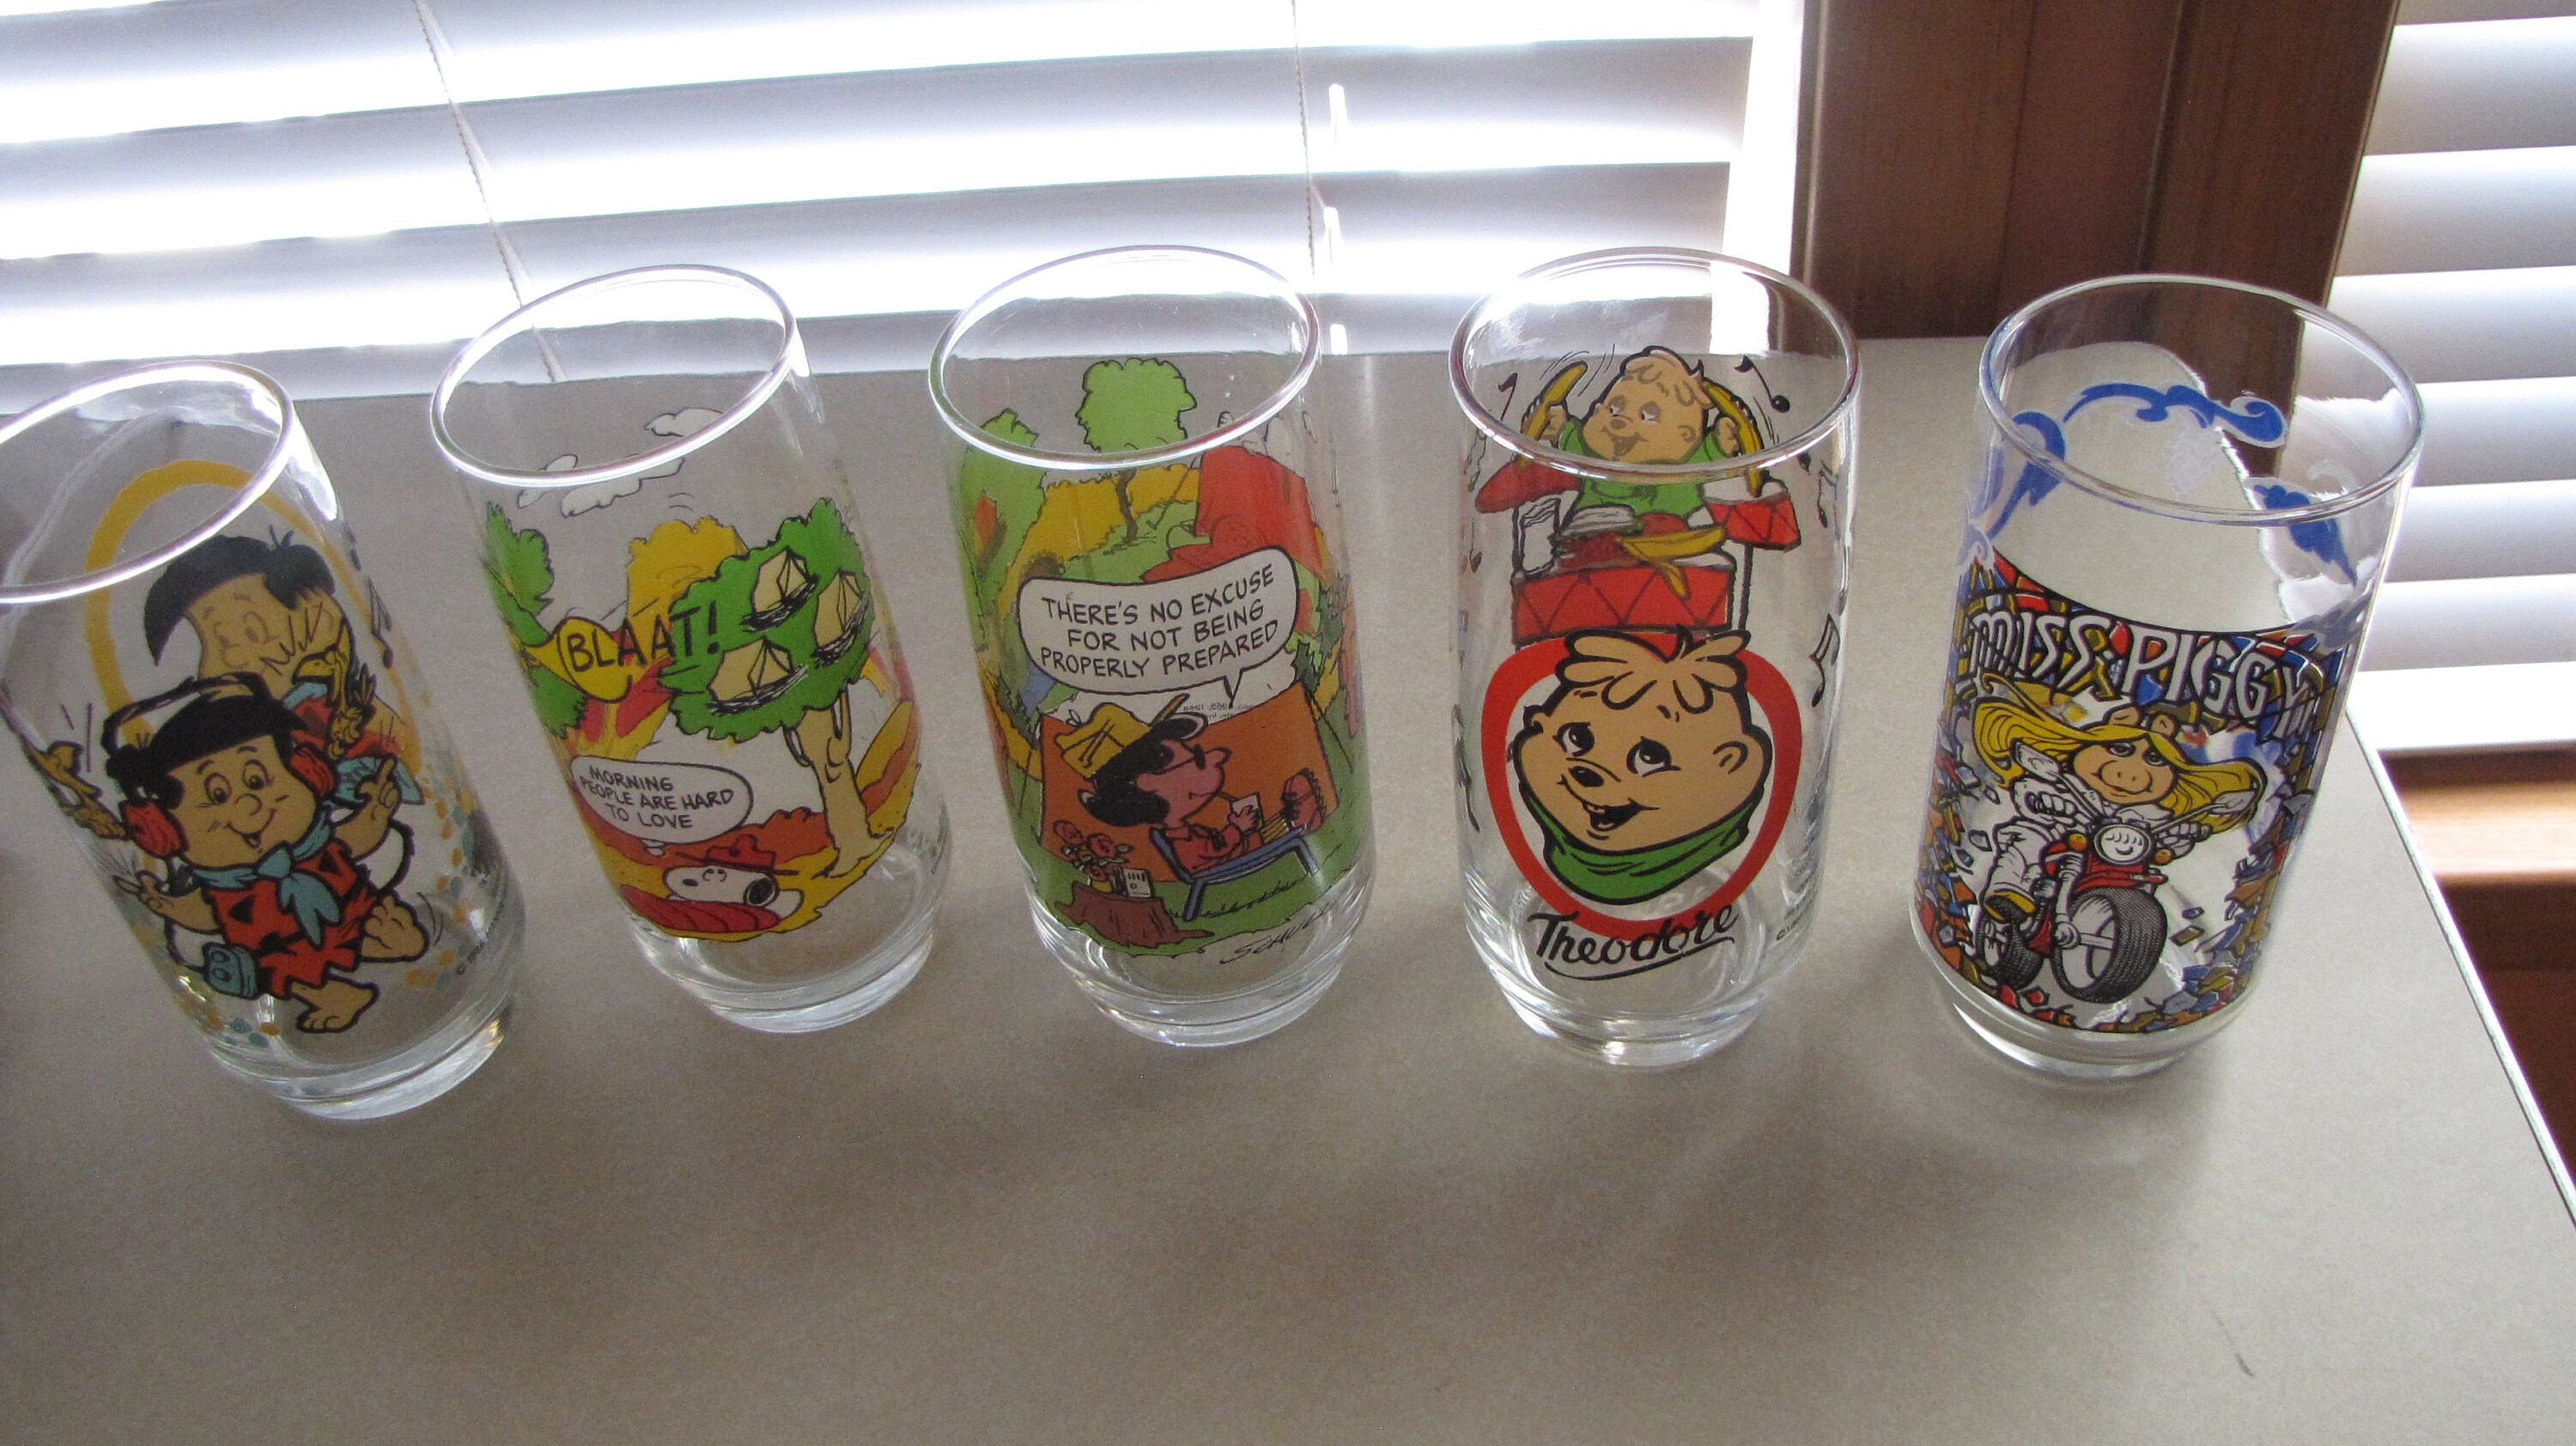 Cartoon Character Large Drinking Glasses Choice From Variety of